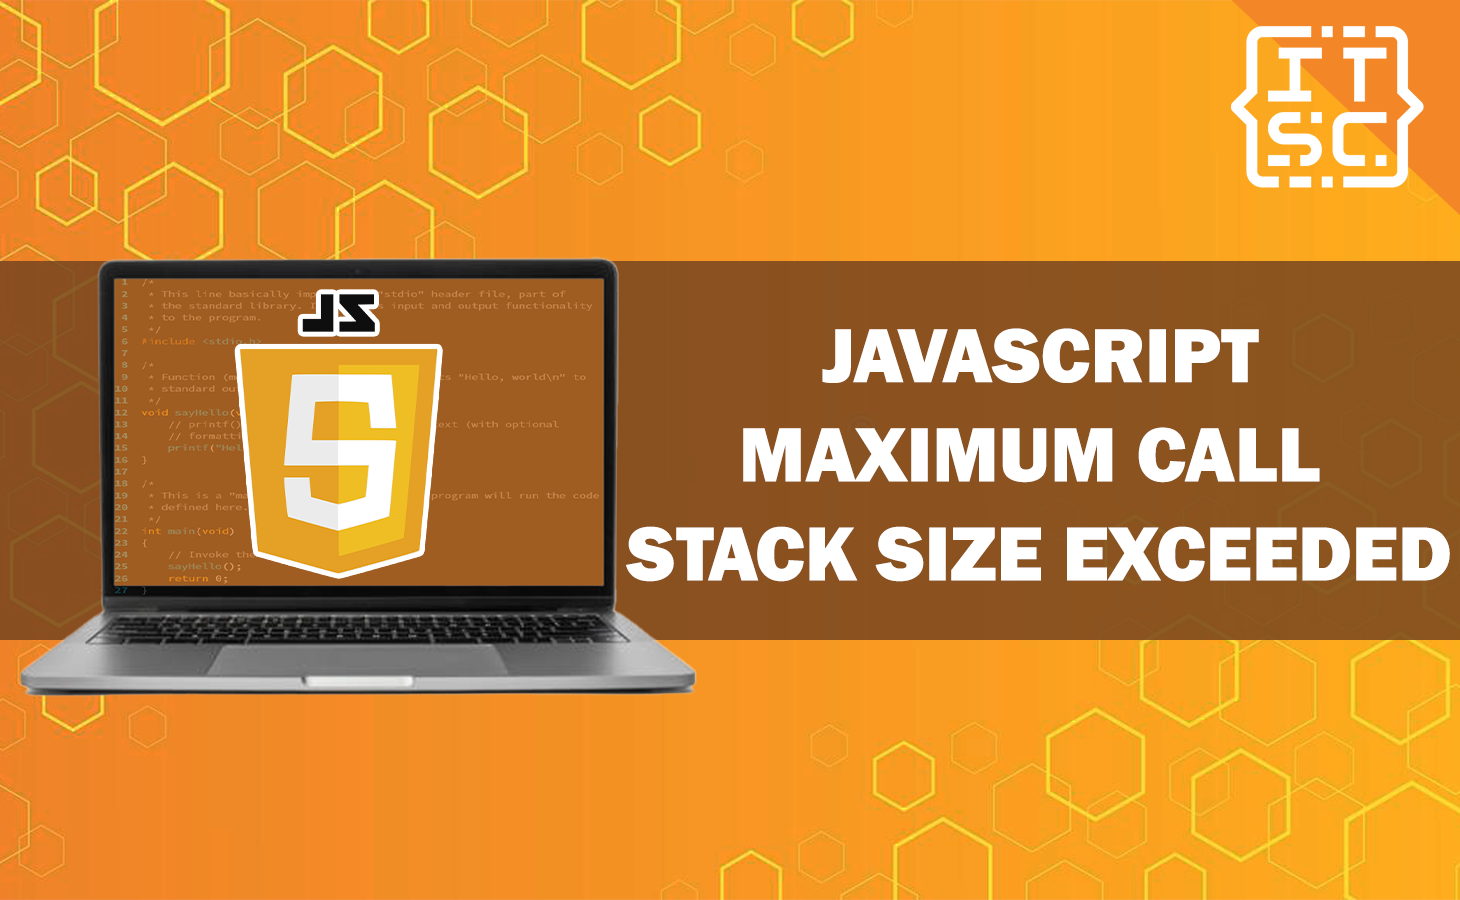 JavaScript Maximum Call Stack Size Exceeded